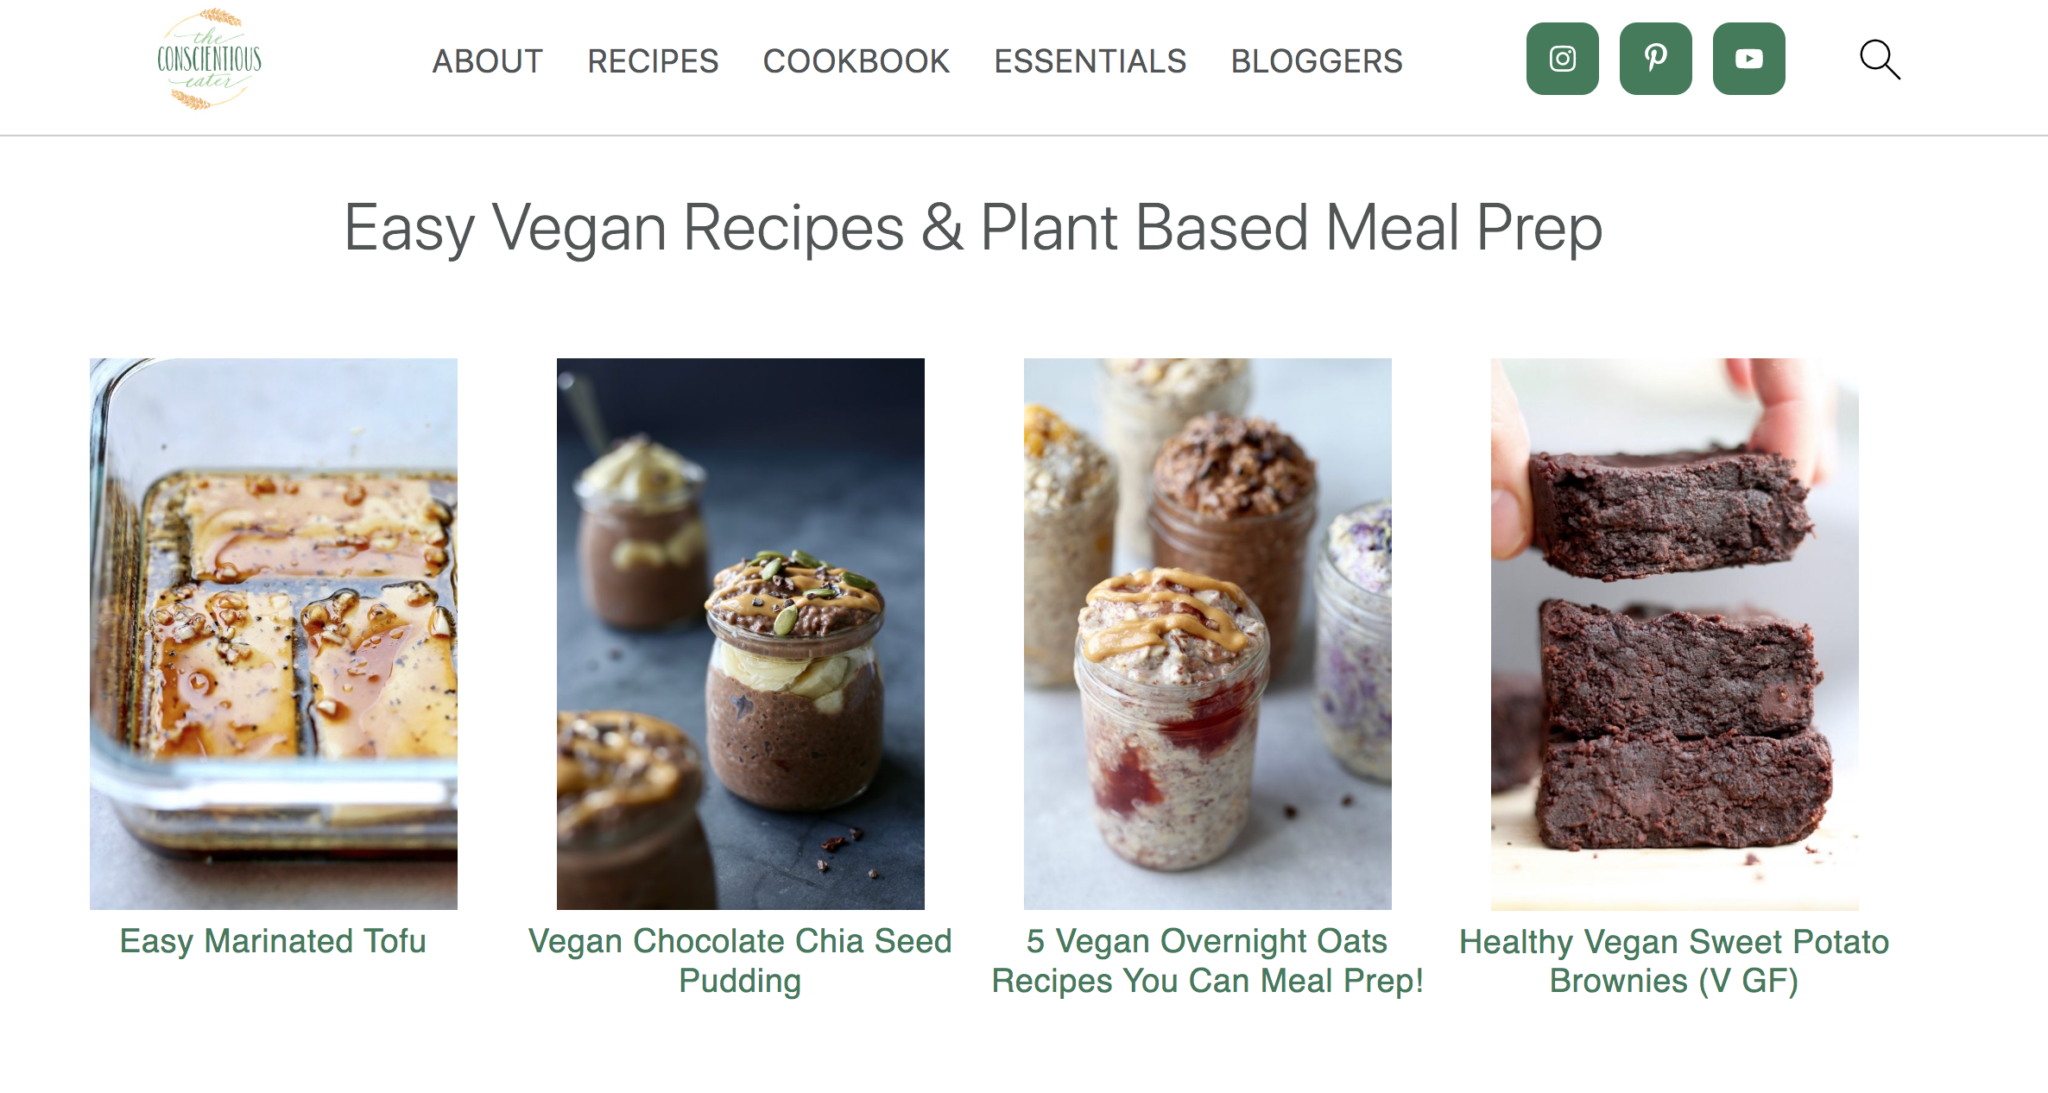 5 Vegan Overnight Oats Recipes You Can Meal Prep! - The Conscientious Eater